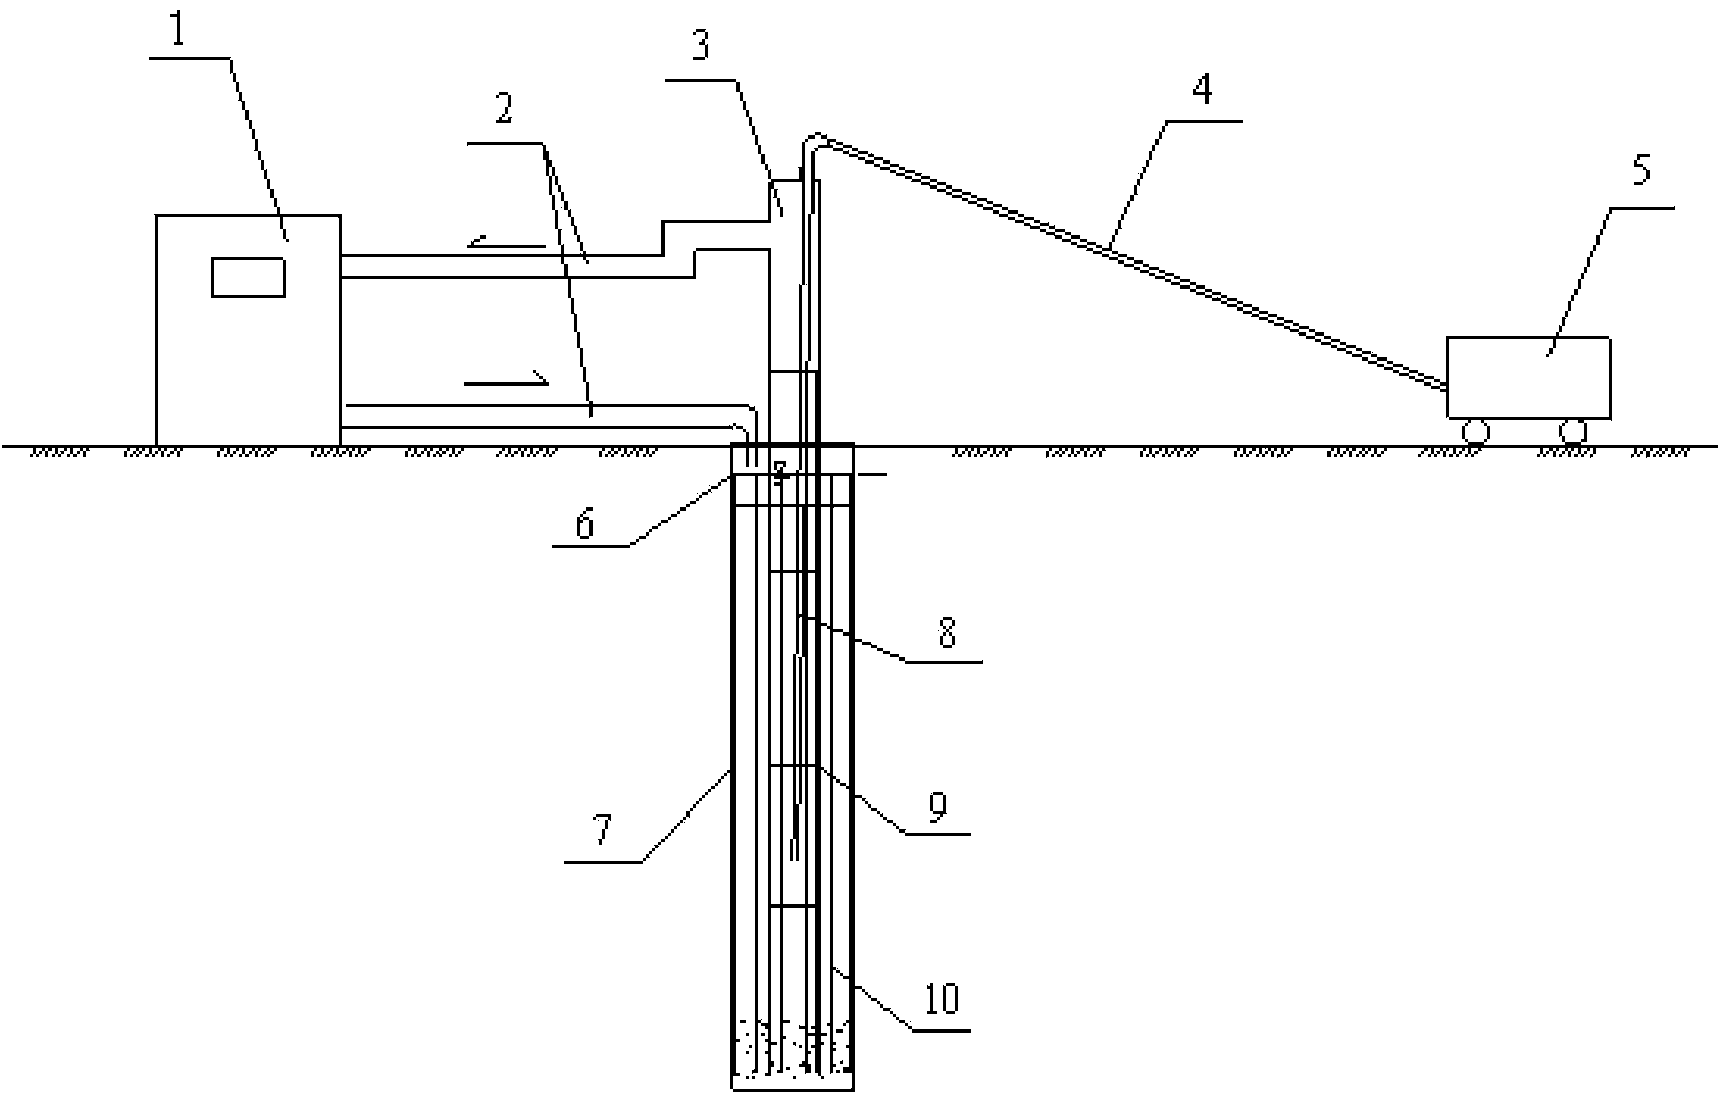 Cast-in-situ bored pile constructing method for cleaning sediment by gas lift reverse circulation method